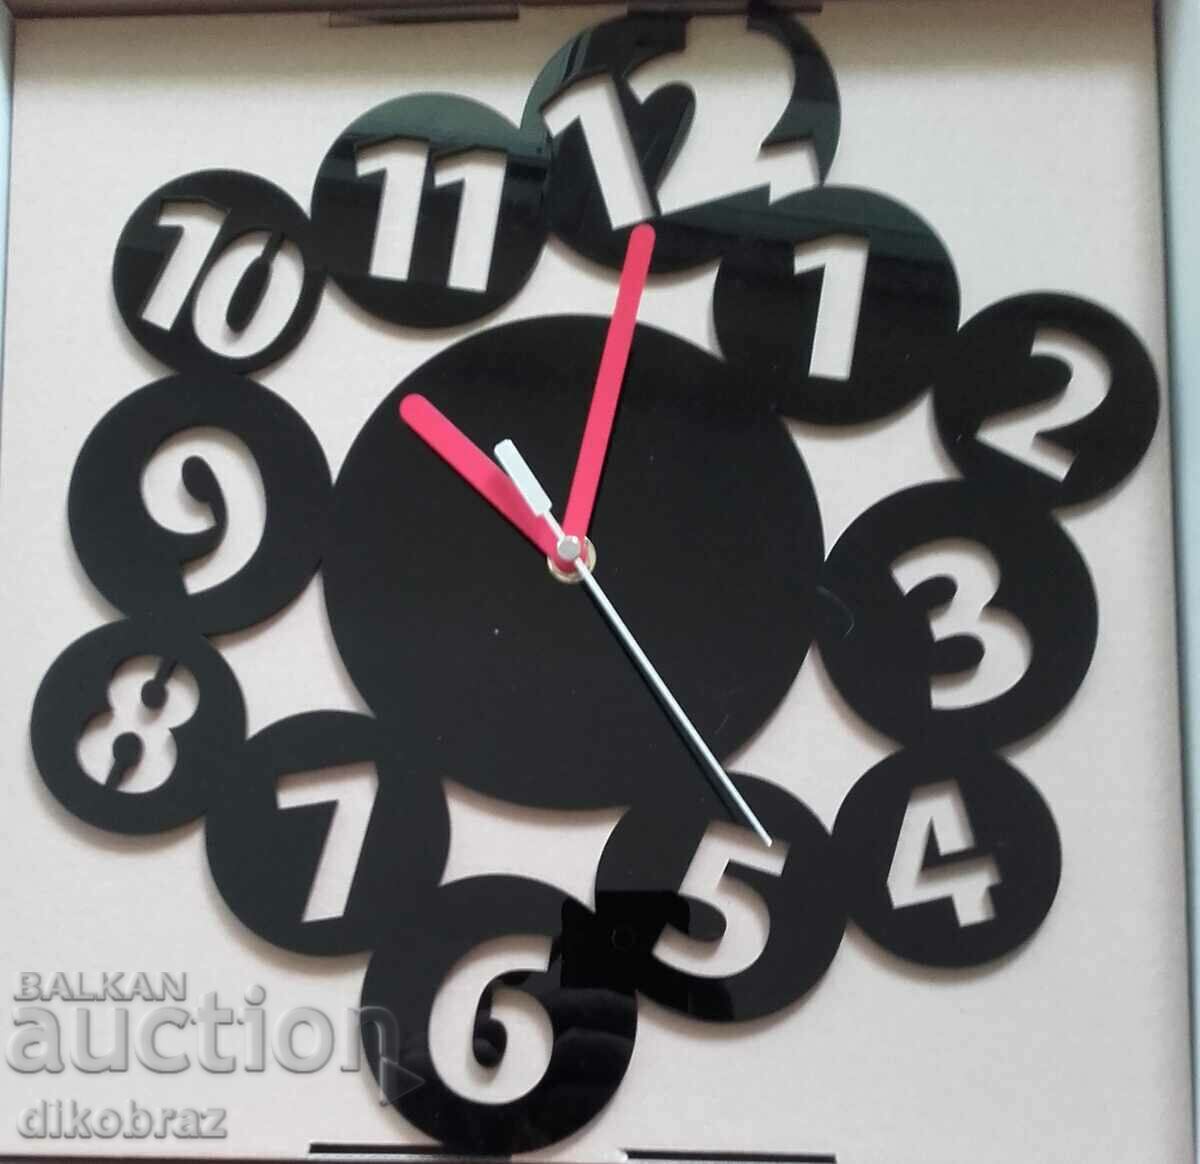 NEW wall clock - Magic number ZEGARA Poland - from a penny